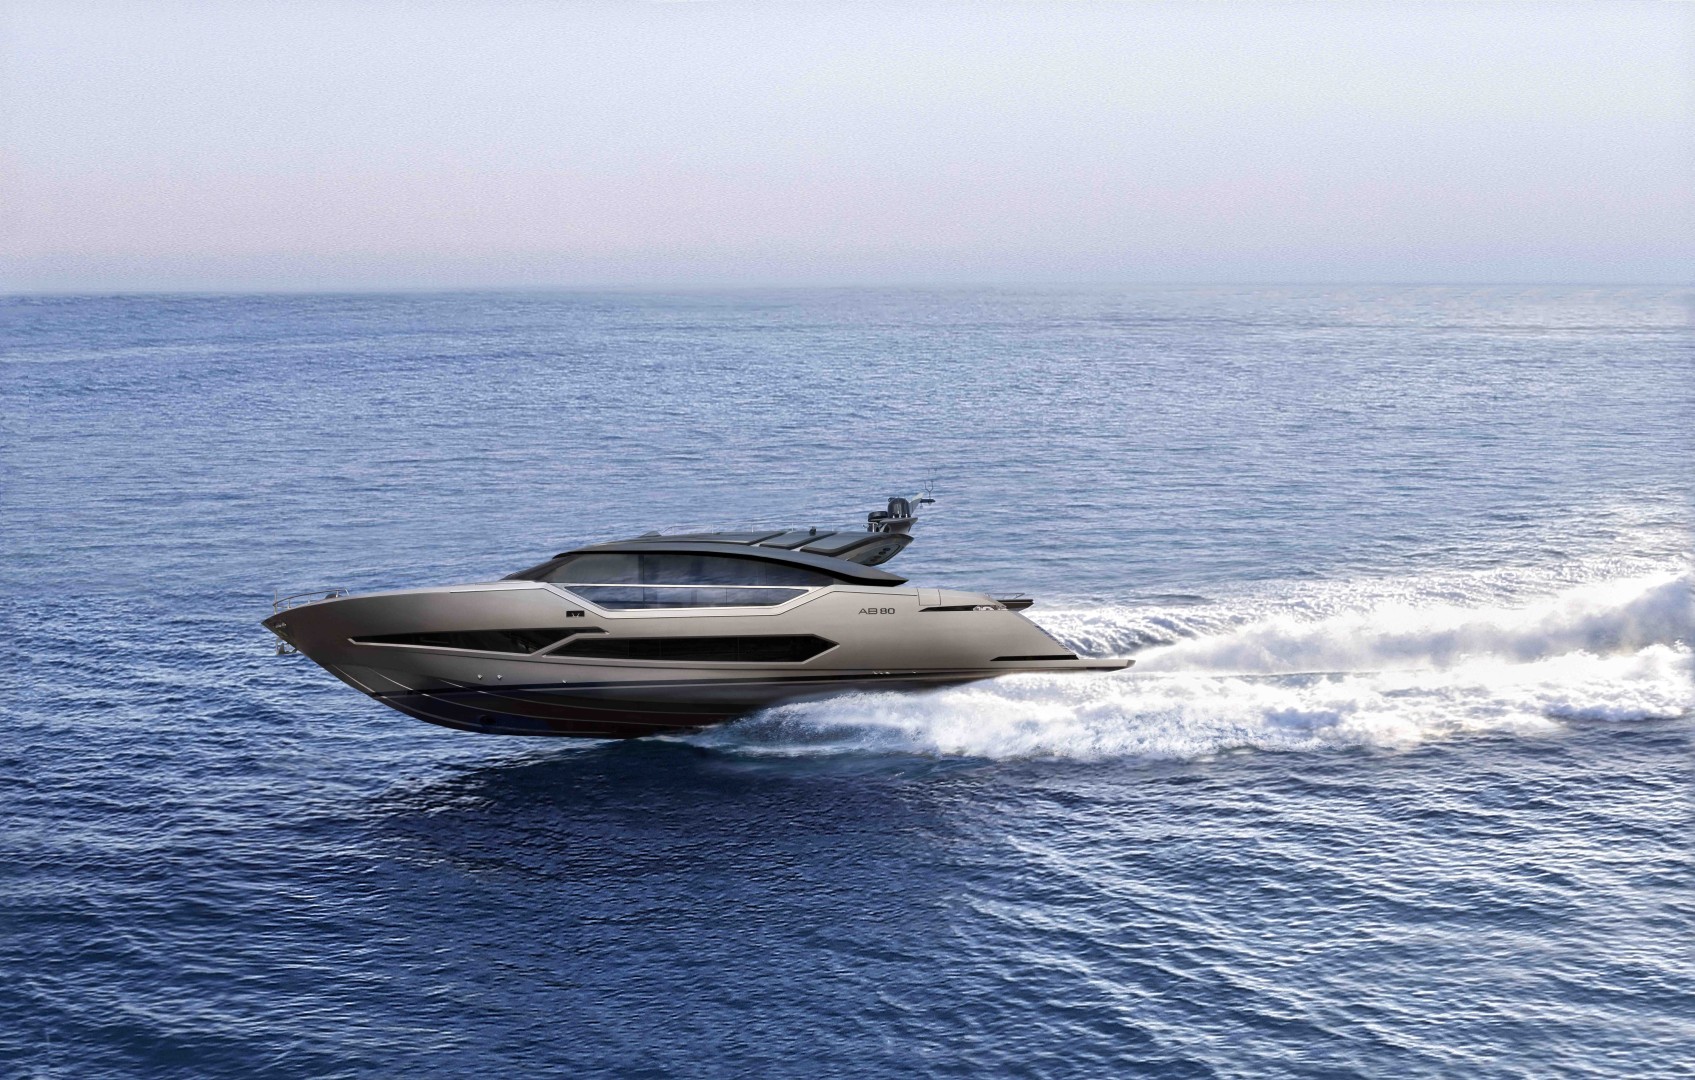 Next Yacht Group: the new AB80 will be soon in US